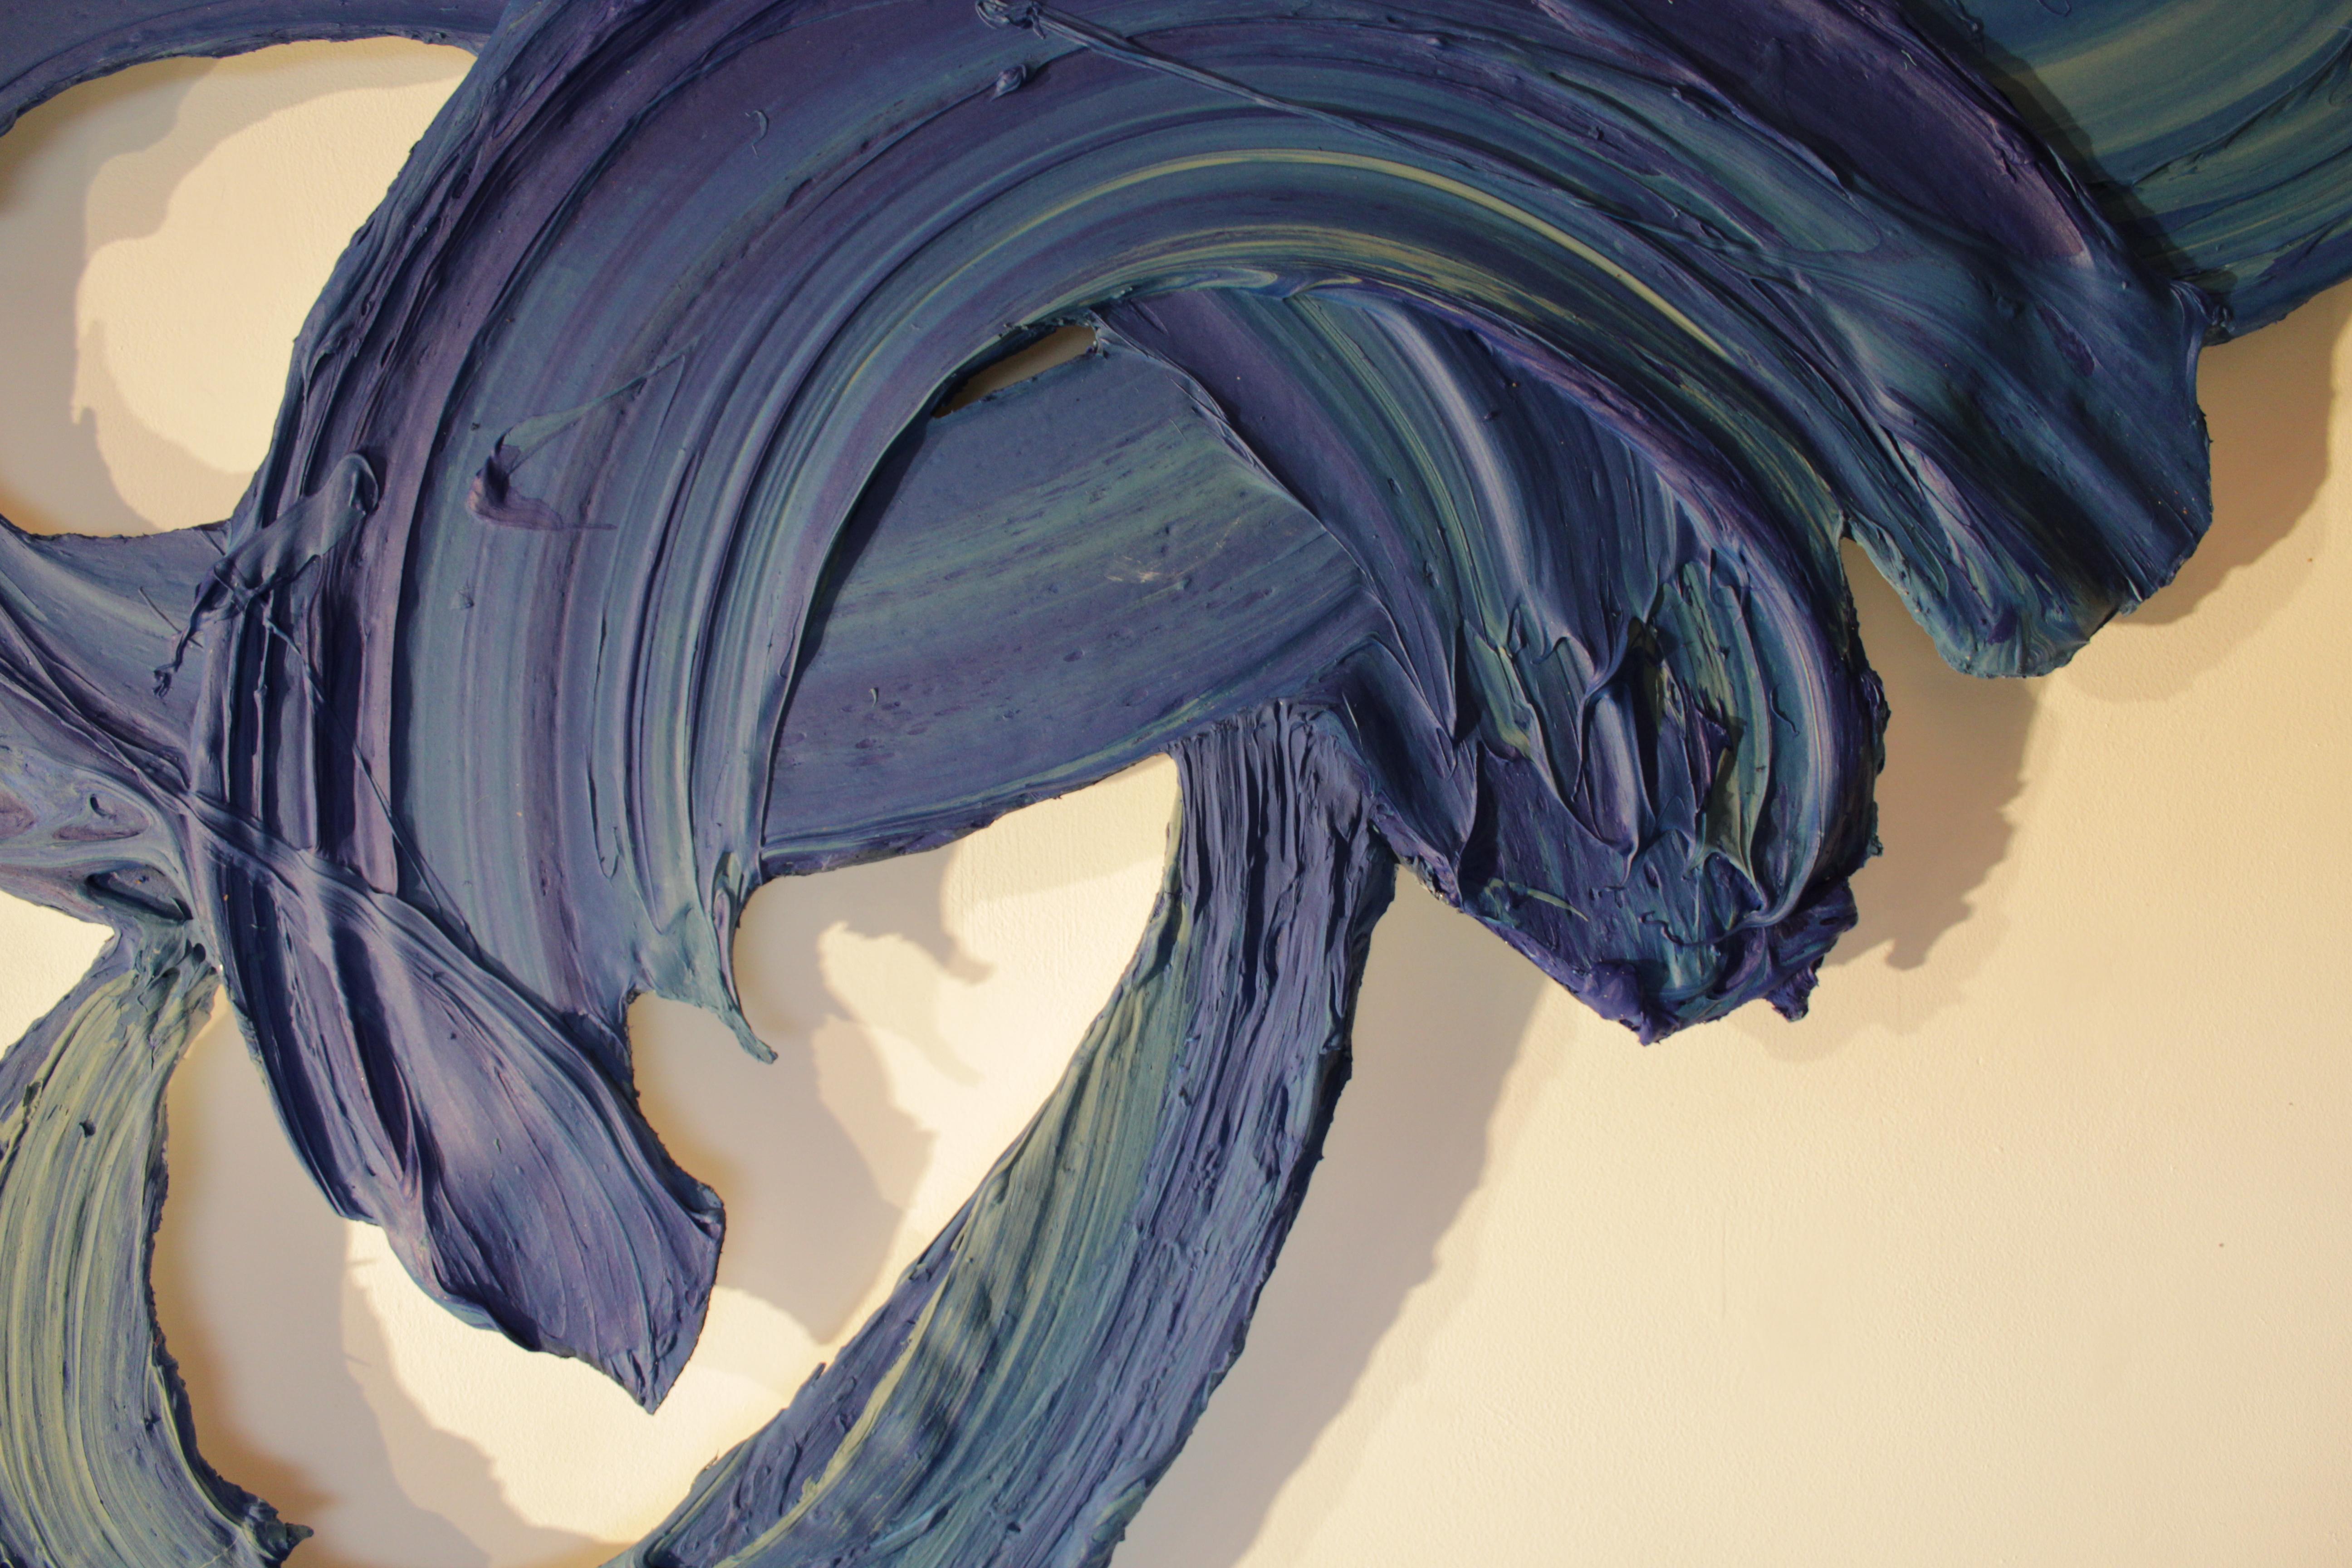 Eschequier - Painting by Donald Martiny